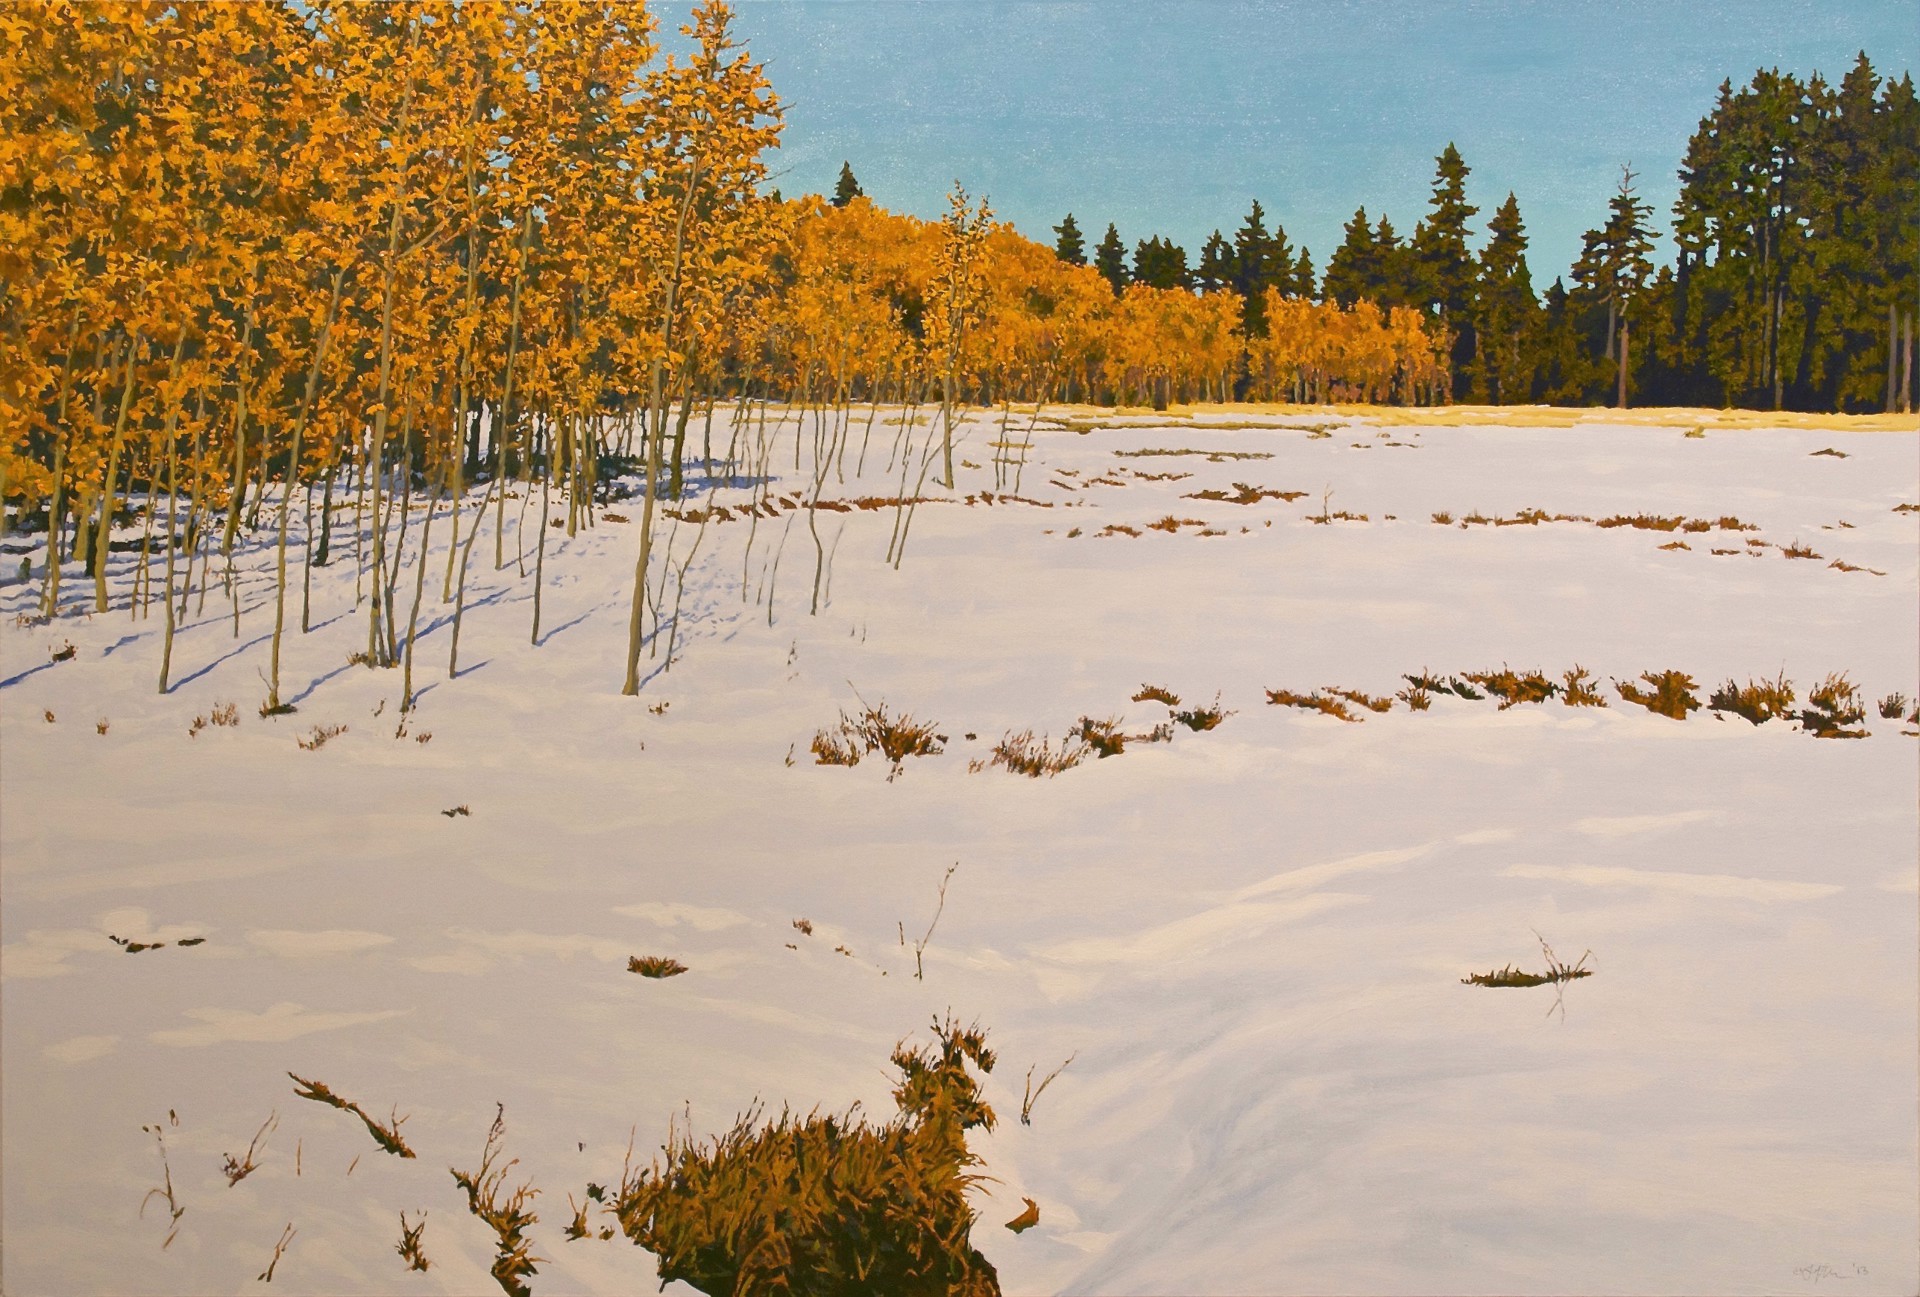 Snowy Field with Aspens by Peter Loftus